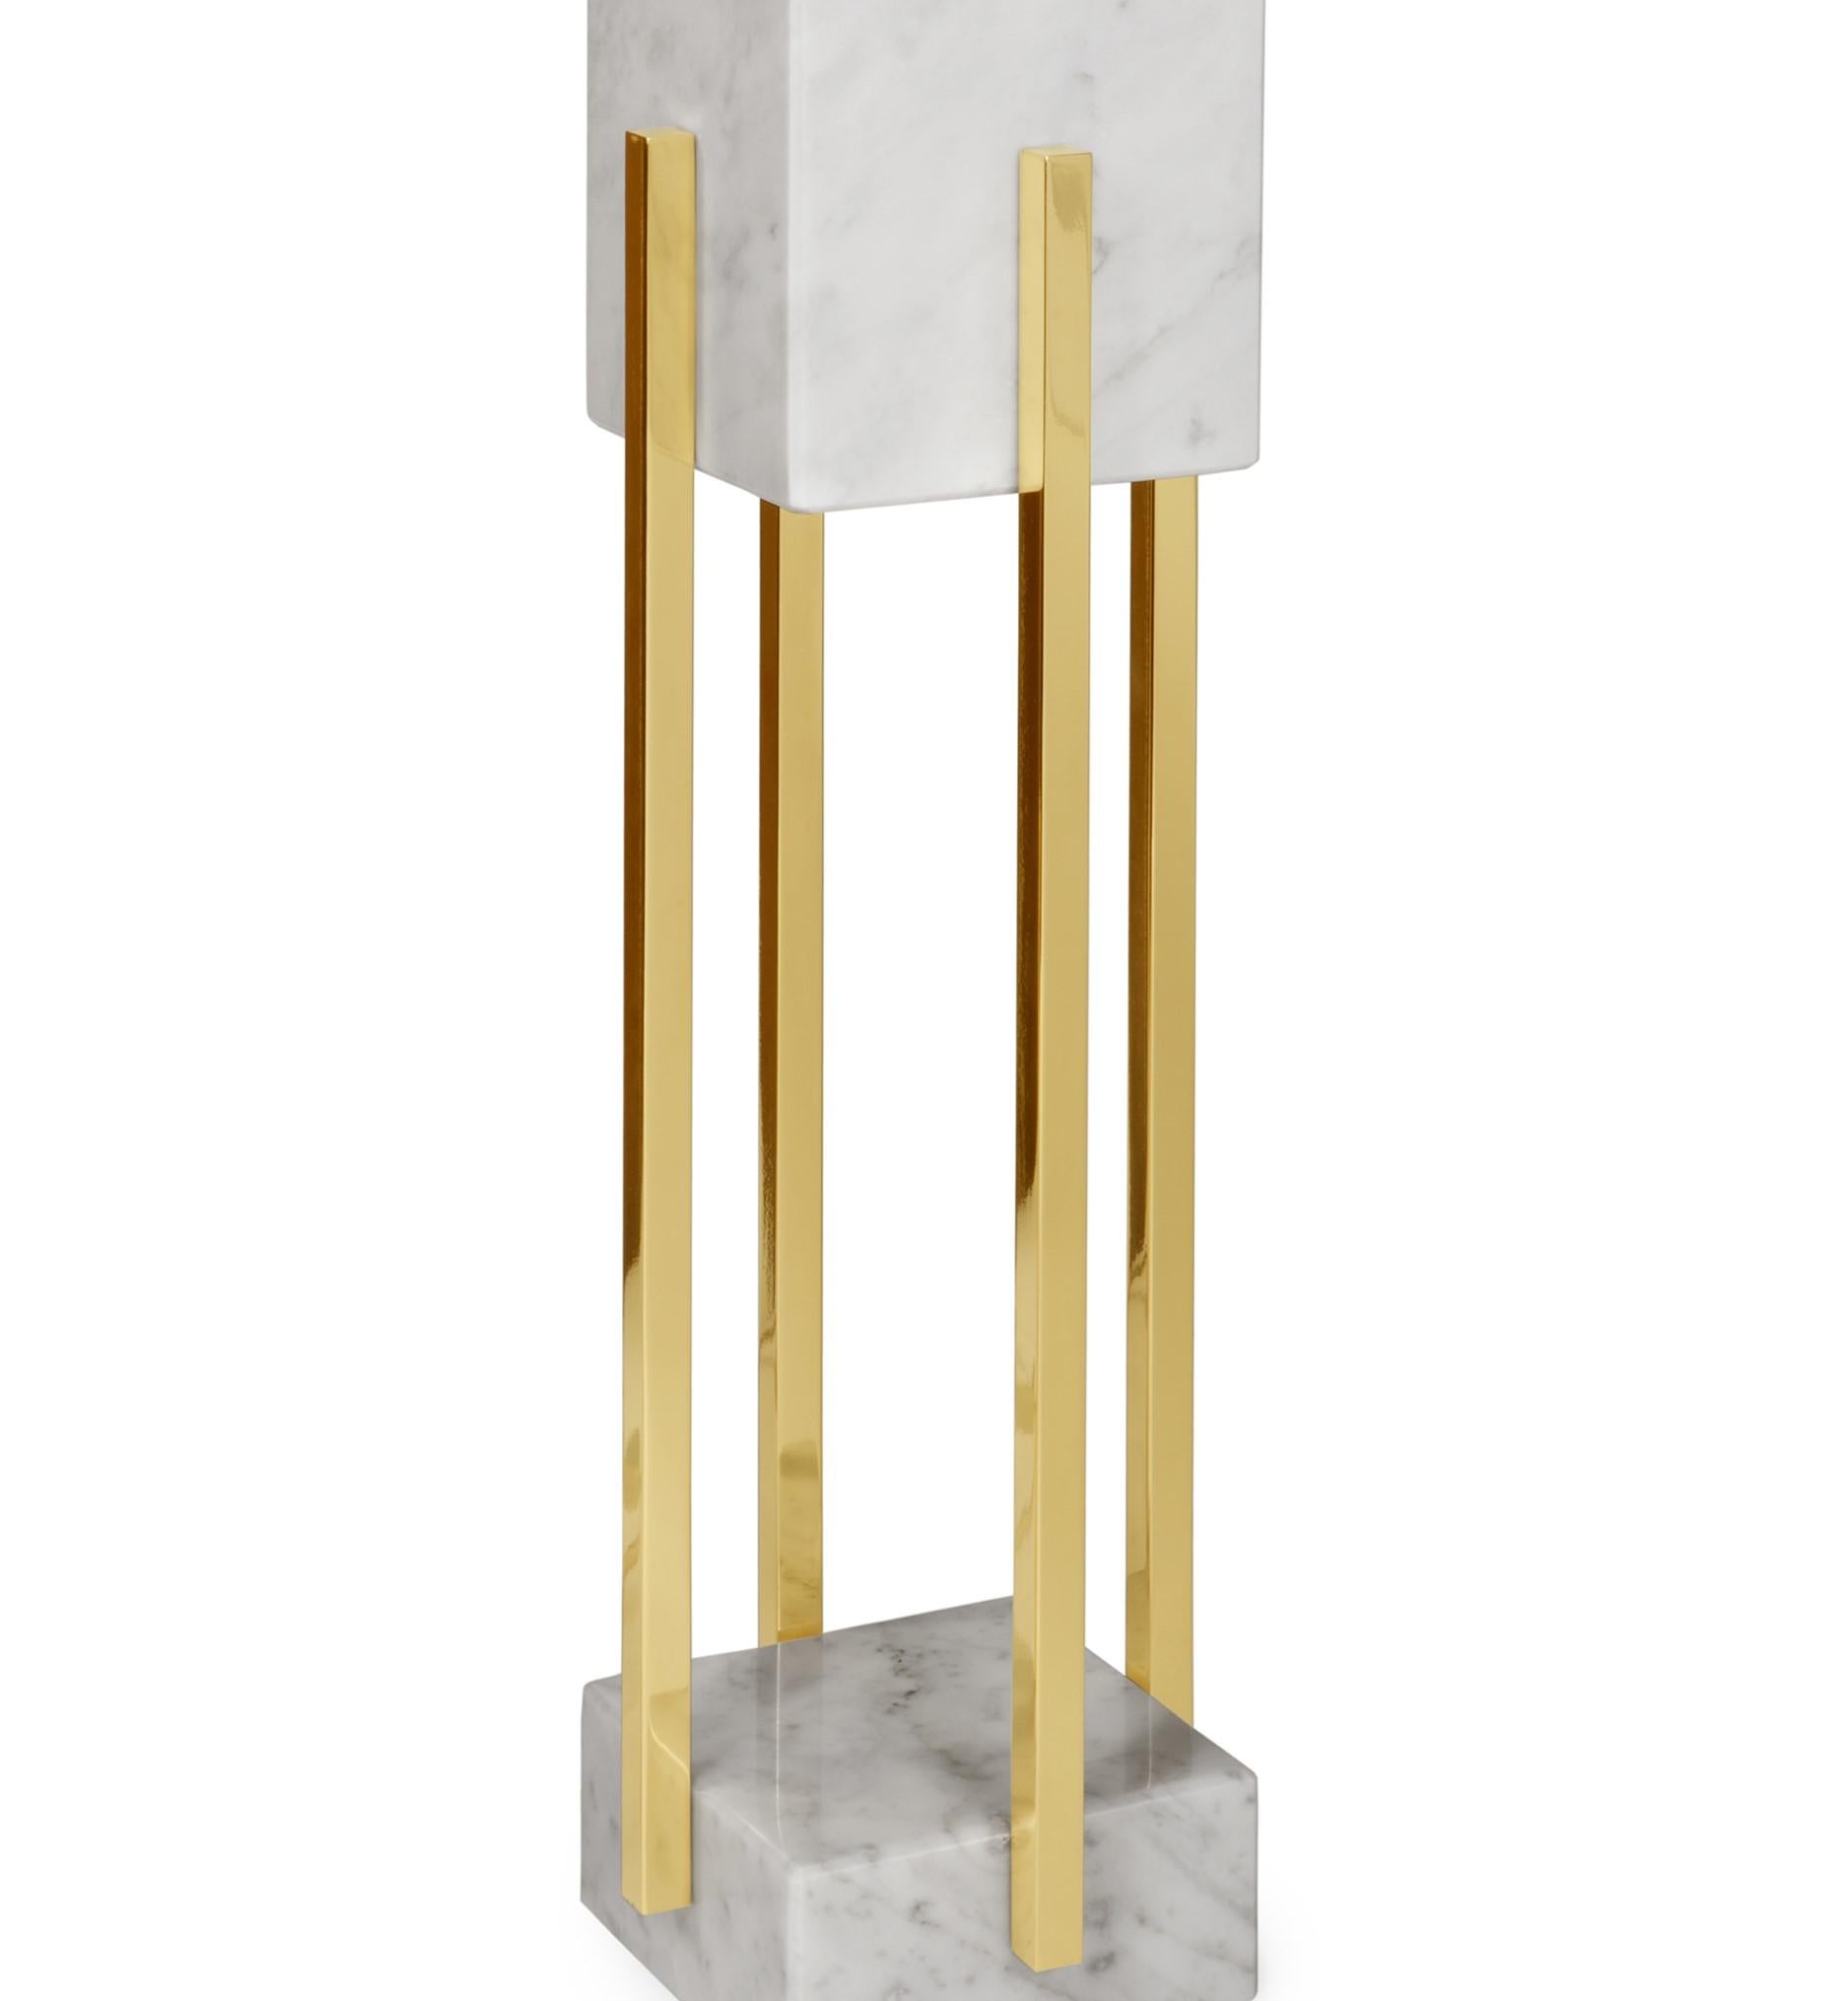 Portuguese Looshaus Carrara Marble and Brass Table Lamp by InsidherLand For Sale